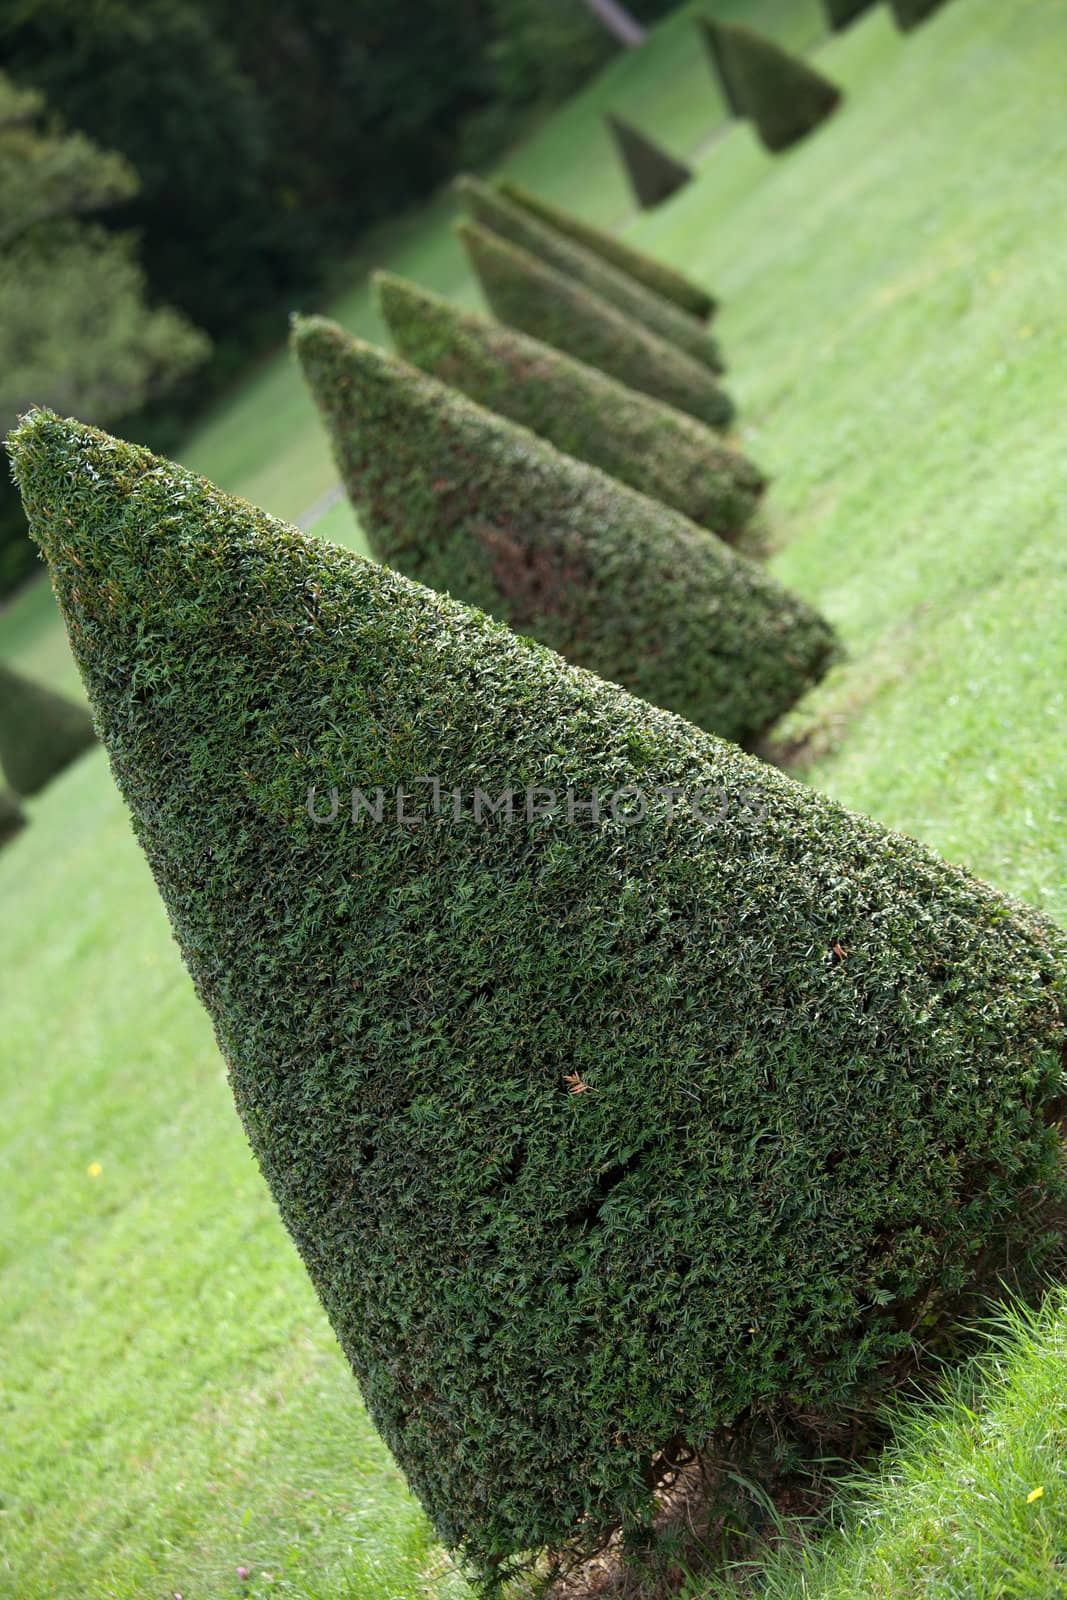 Group of evergreen pruned cone European box tree bushes or conifers on grass in cultivated park on the forest background